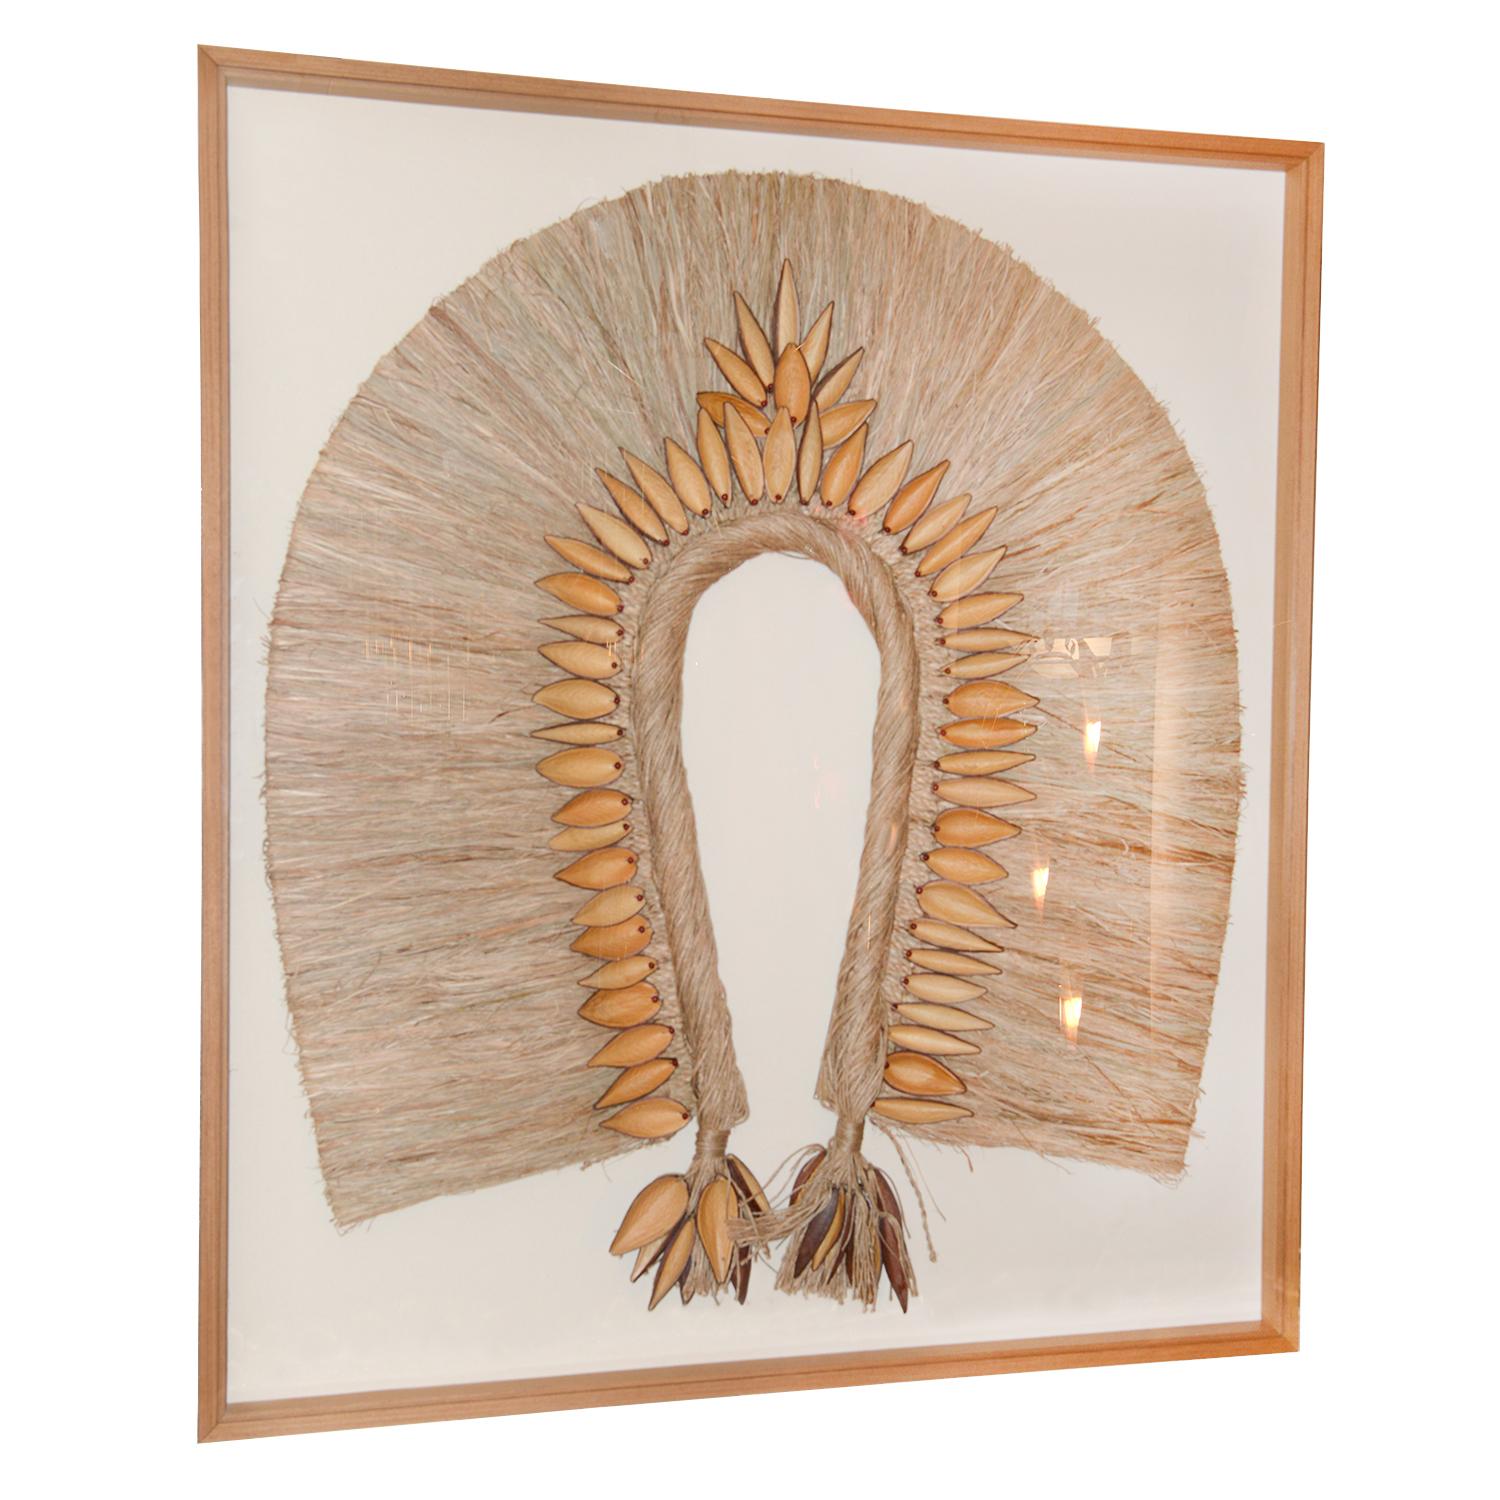 Wall Decoration Amazon Headdress traditional headdress of an 
aboriginal tribe from the Amazon made up of strands of natural 
straw, and dehydrated canoihna husks, husks arranged by hand 
and straws intertwined by hand. Frame in solid Tauari,